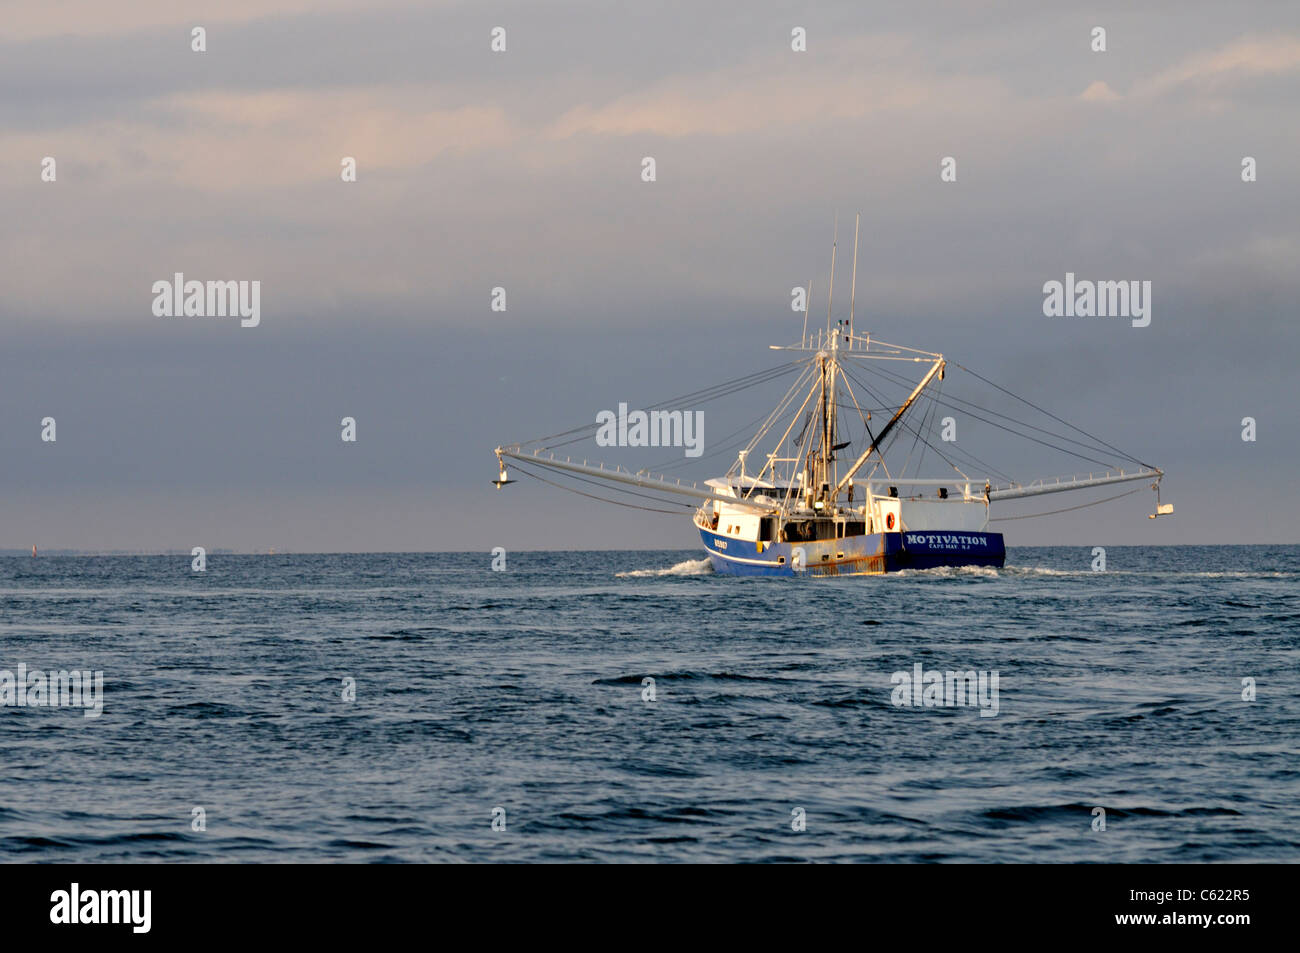 Blue hulled fishing boat fishing off the coast of Cape Cod with outriggers extended headed out to sea on a stormy day. USA Stock Photo